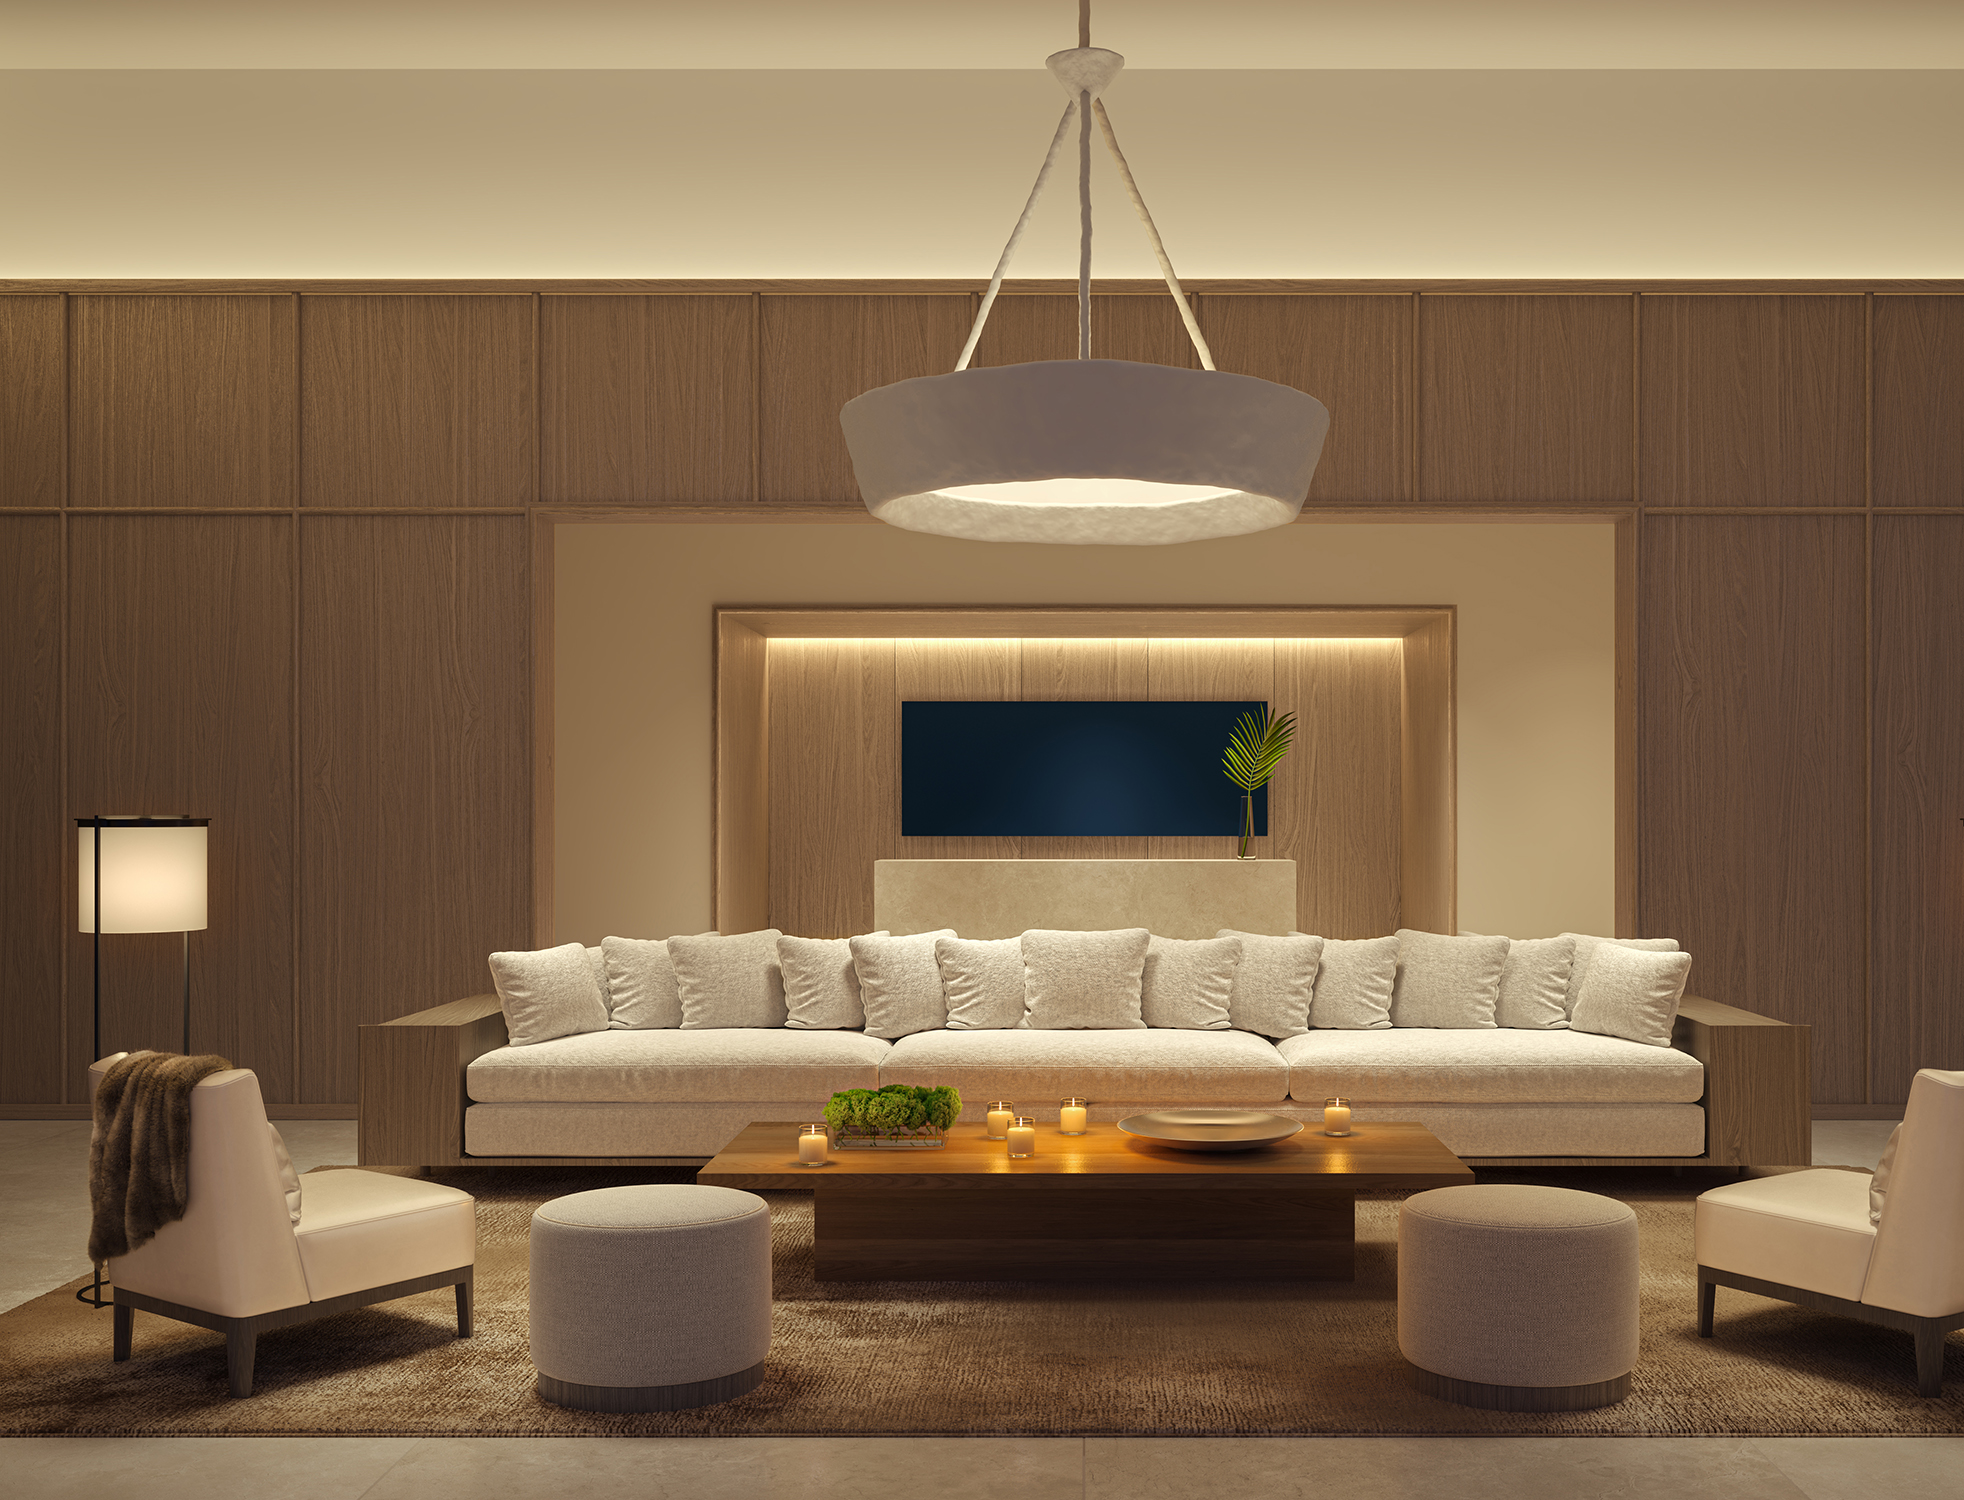 Well-decorated living area of the residence with beautiful hanging light